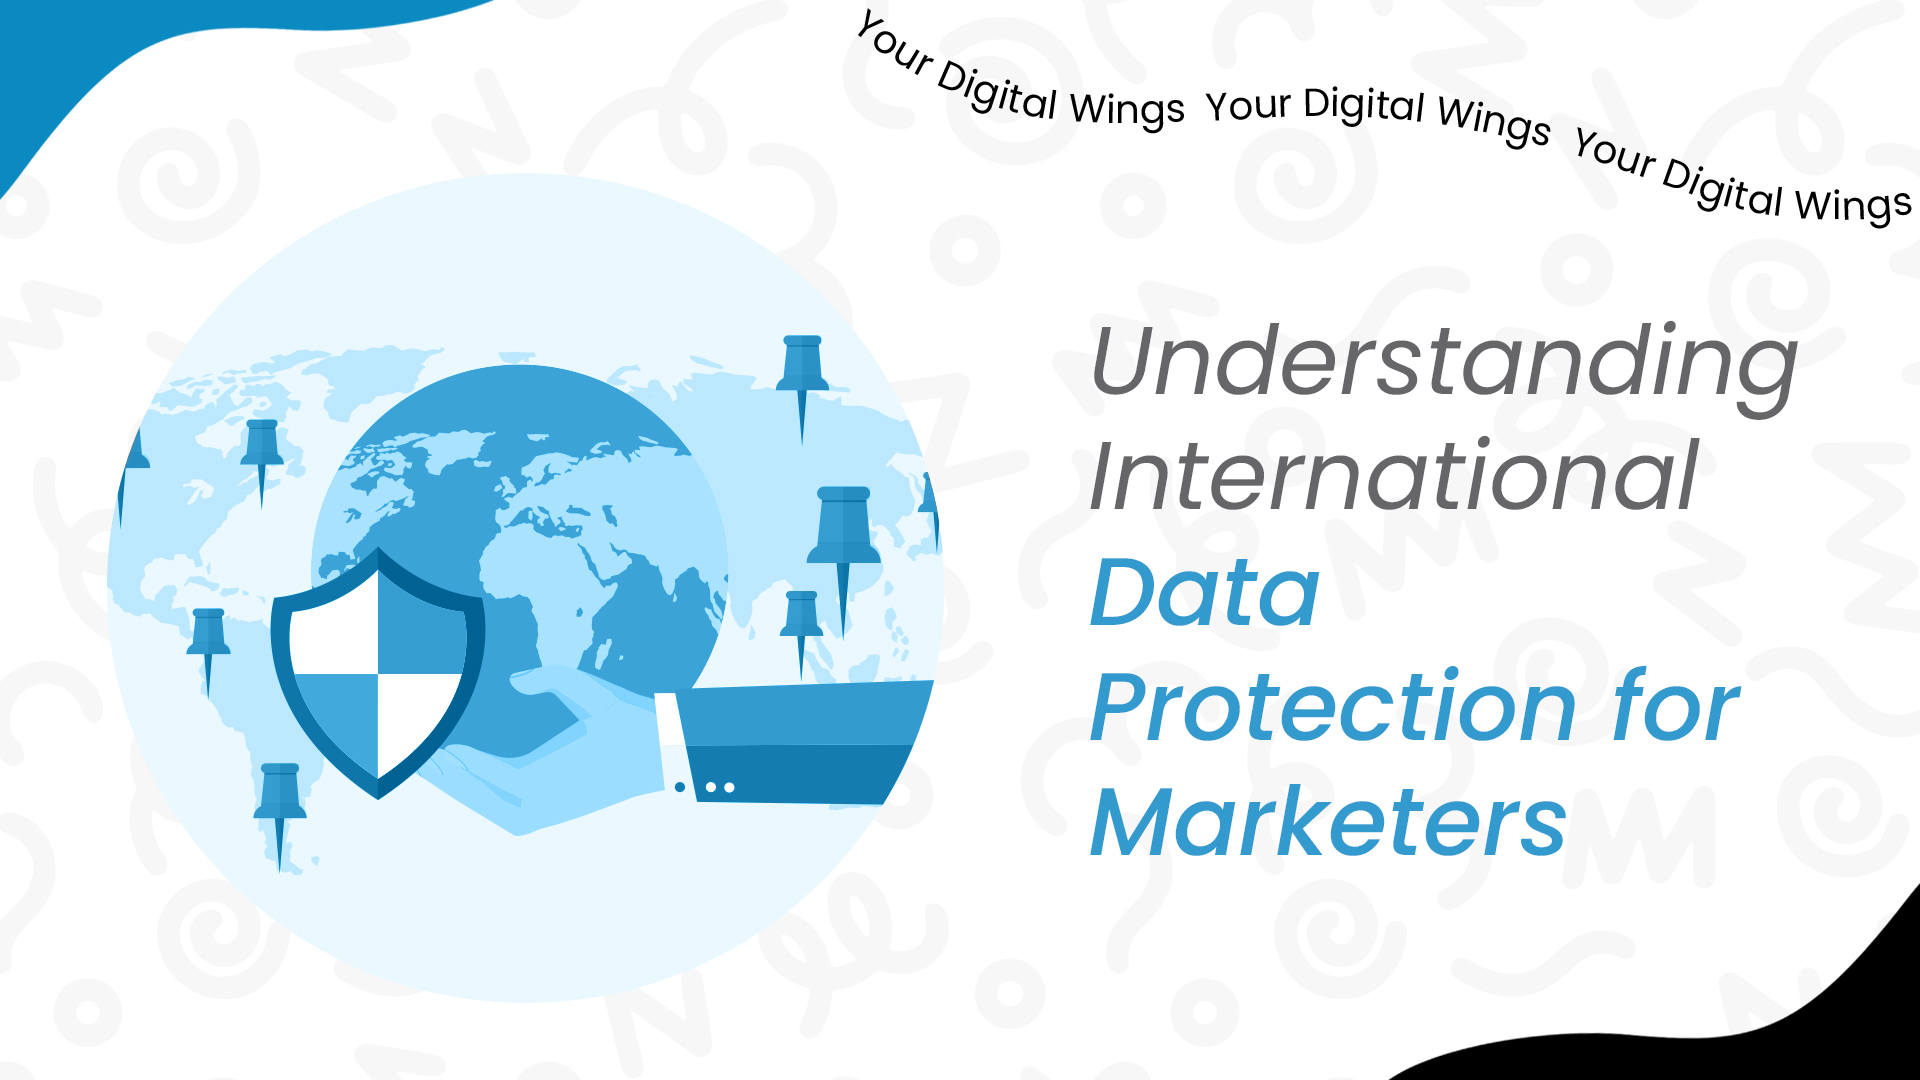 International data protection for marketers